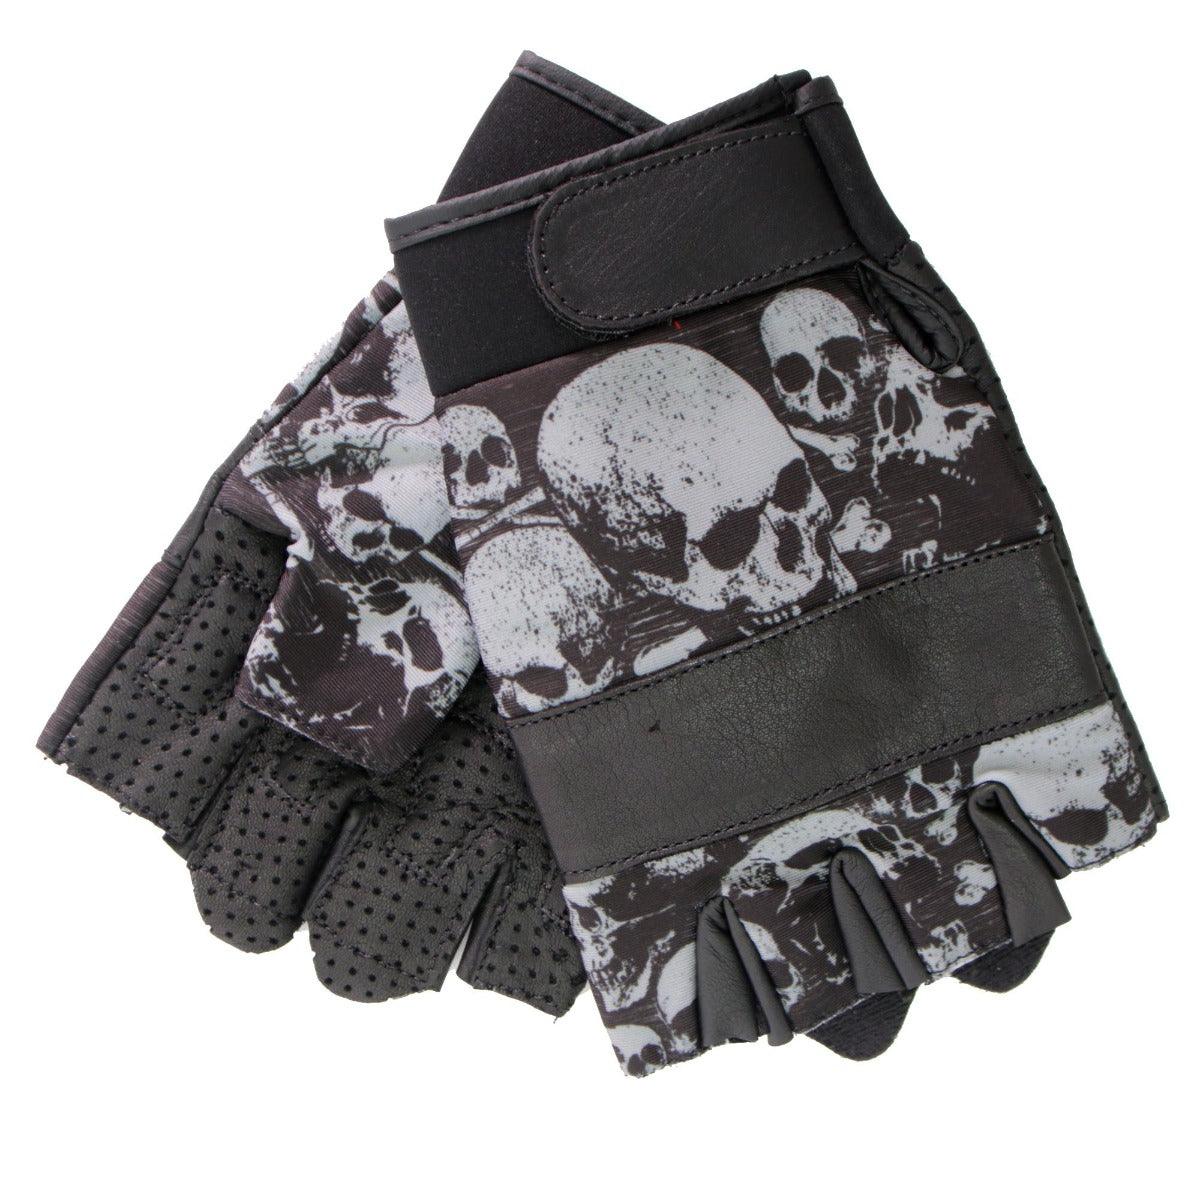 Hot Leathers Glove Sublimated Leather Ancient Skulls - American Legend Rider